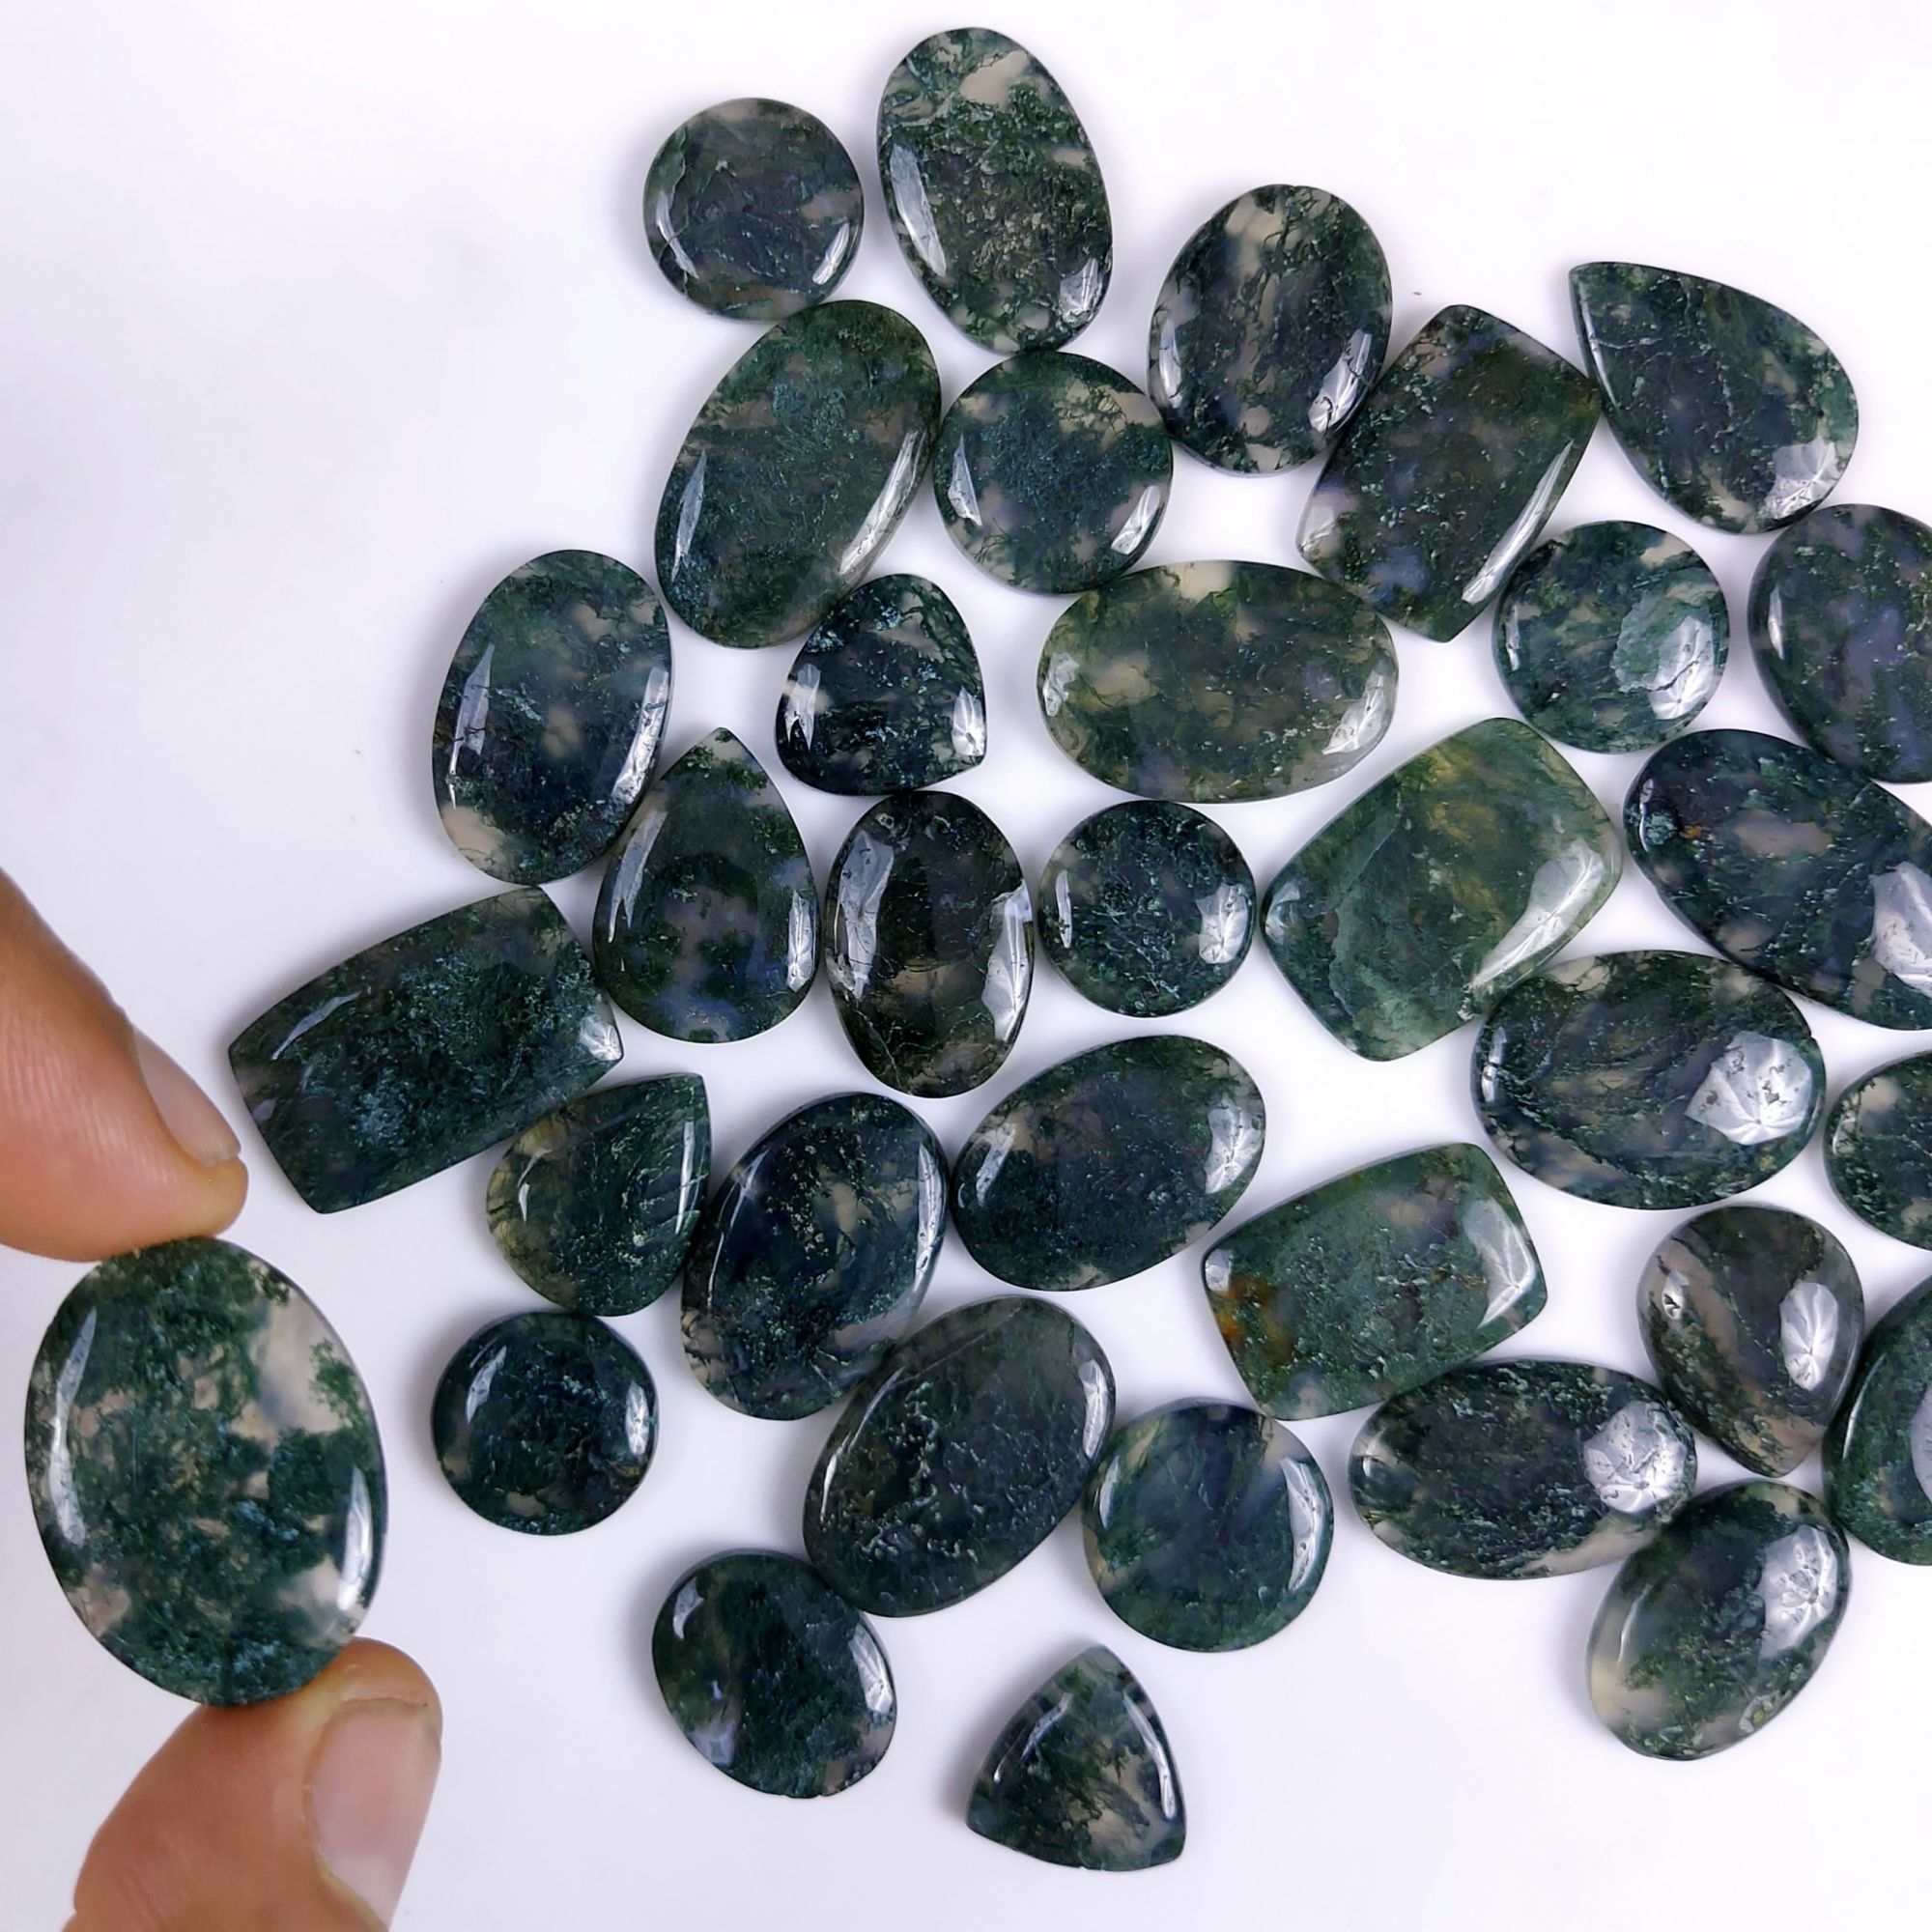 34Pcs 552Cts Natural Green Moss Agate Cabochon Lots Mixed Shapes And Sizes Moss Agate loose gemstone Cabochon Wholesale Lot 28x14 14x14mm#G-355